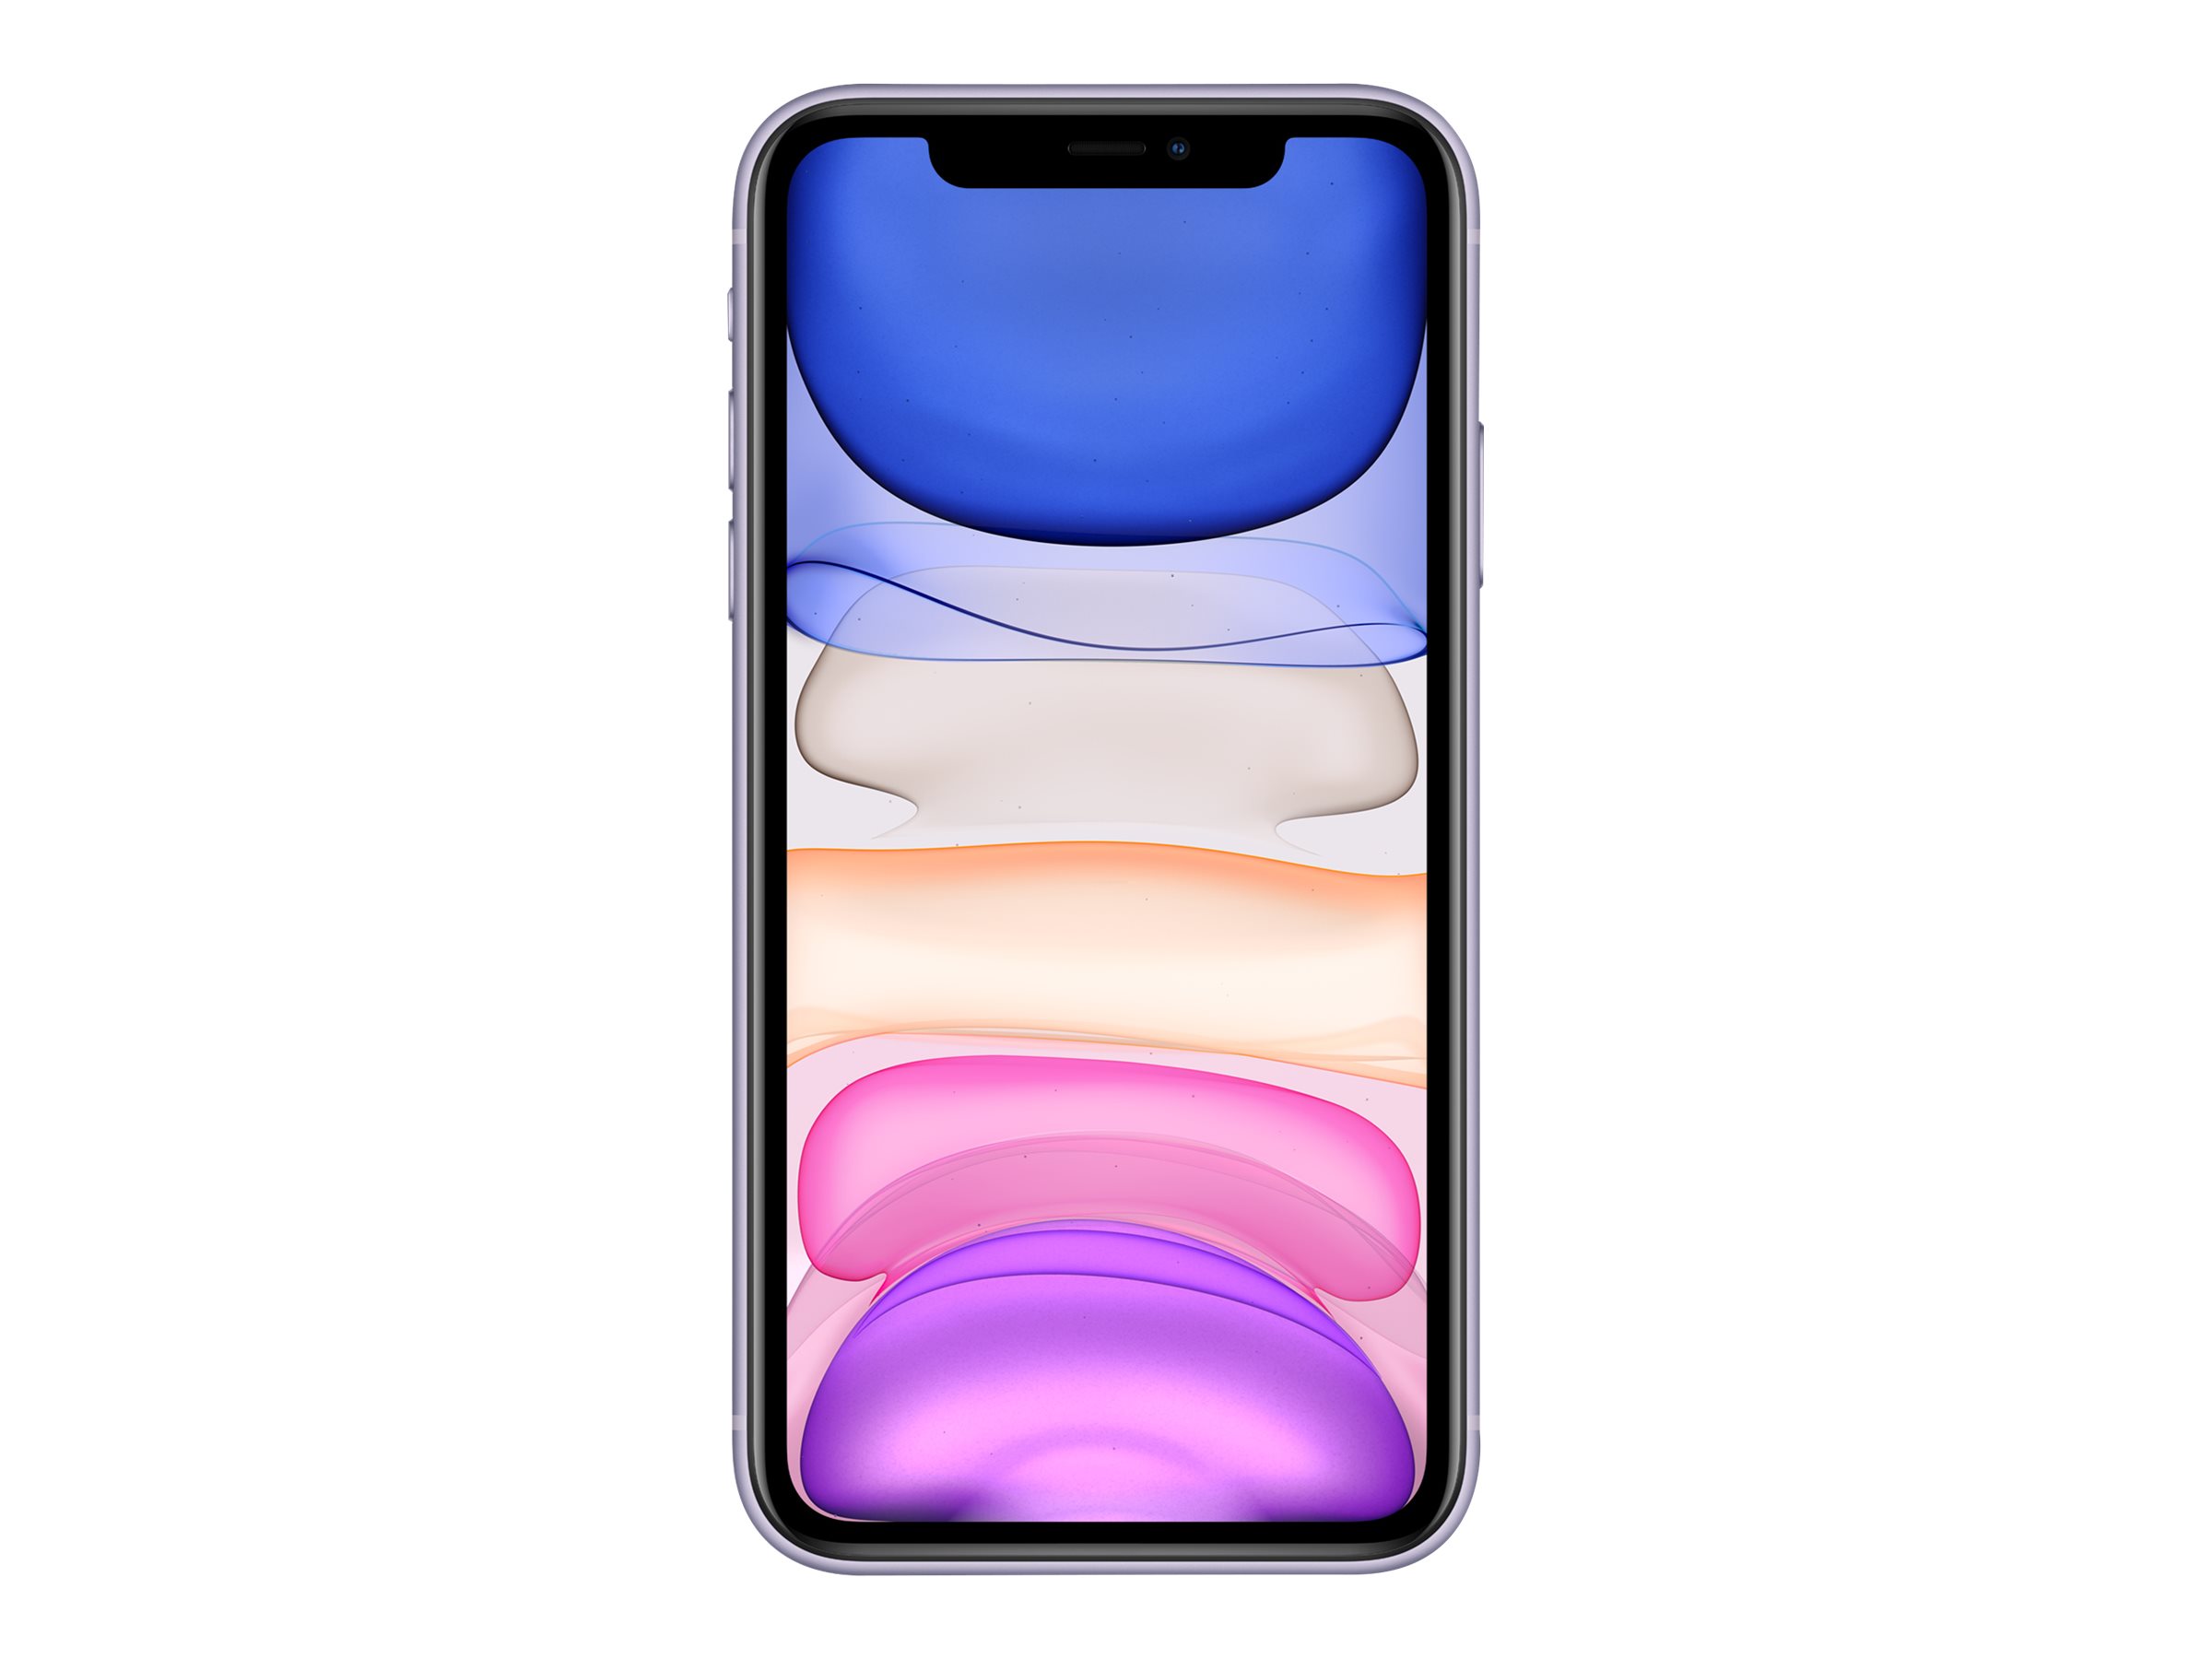 Apple iPhone X (11th Gen) Dimensions & Drawings